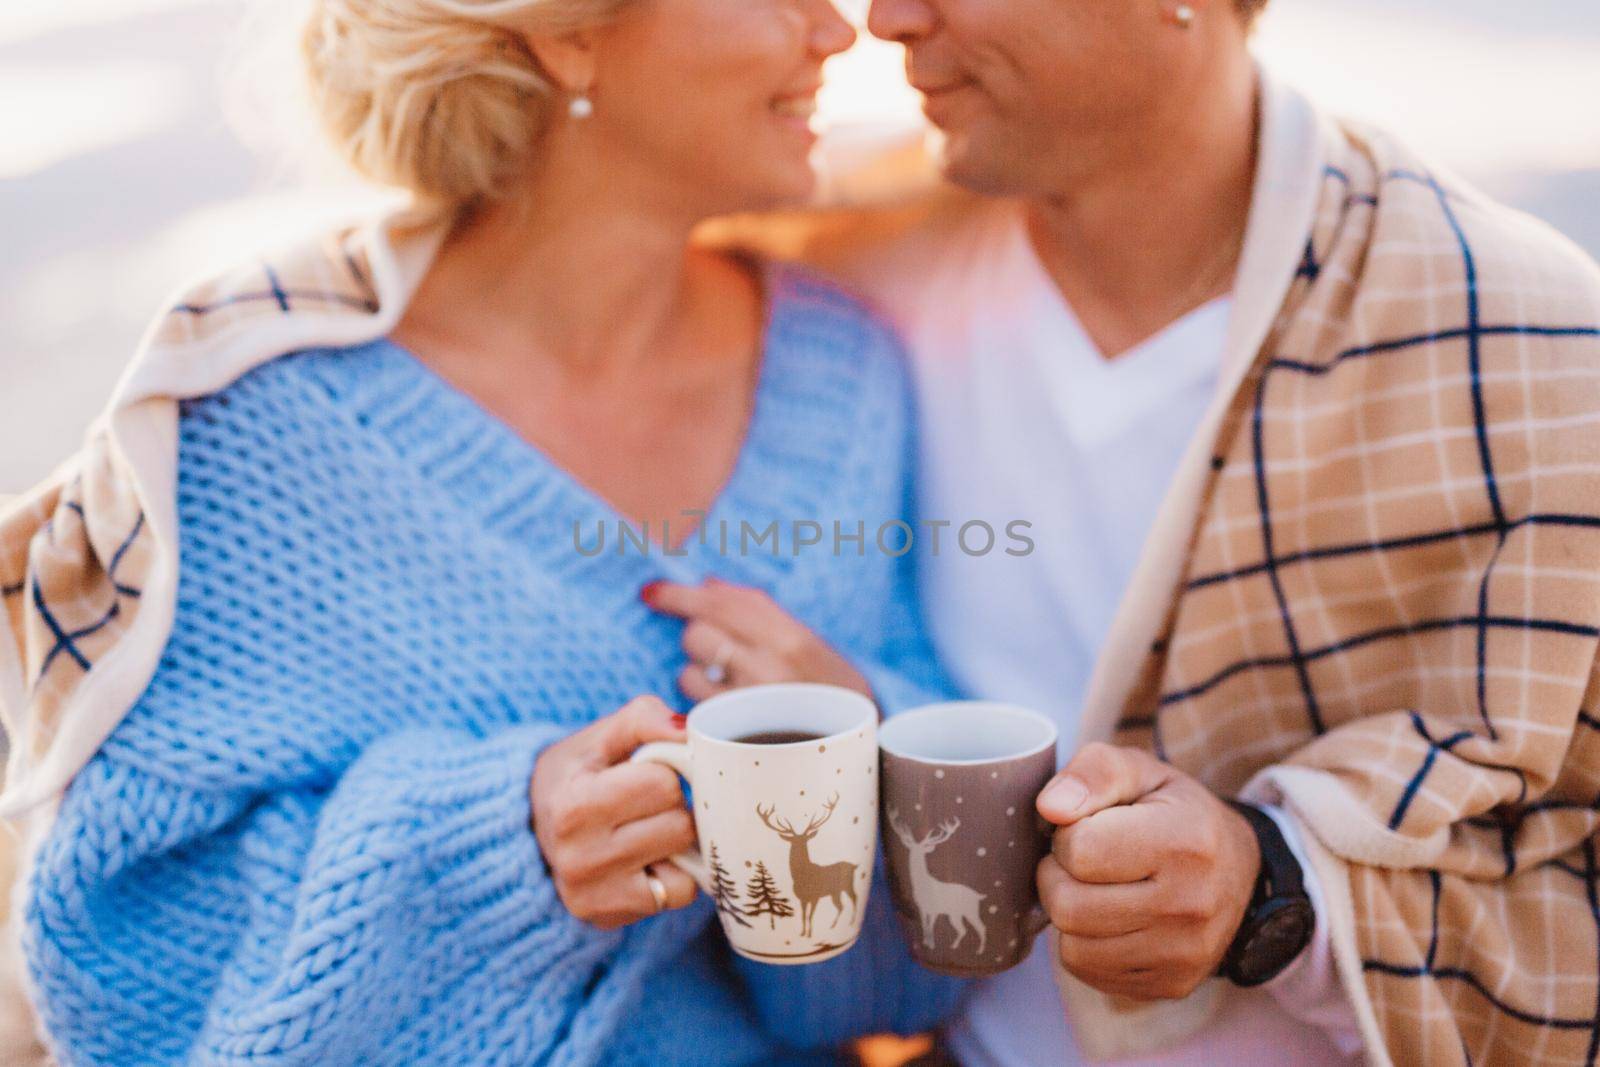 Smiling couple wrapped in a plaid and holding cups in their hands on a background of mountains. High quality photo